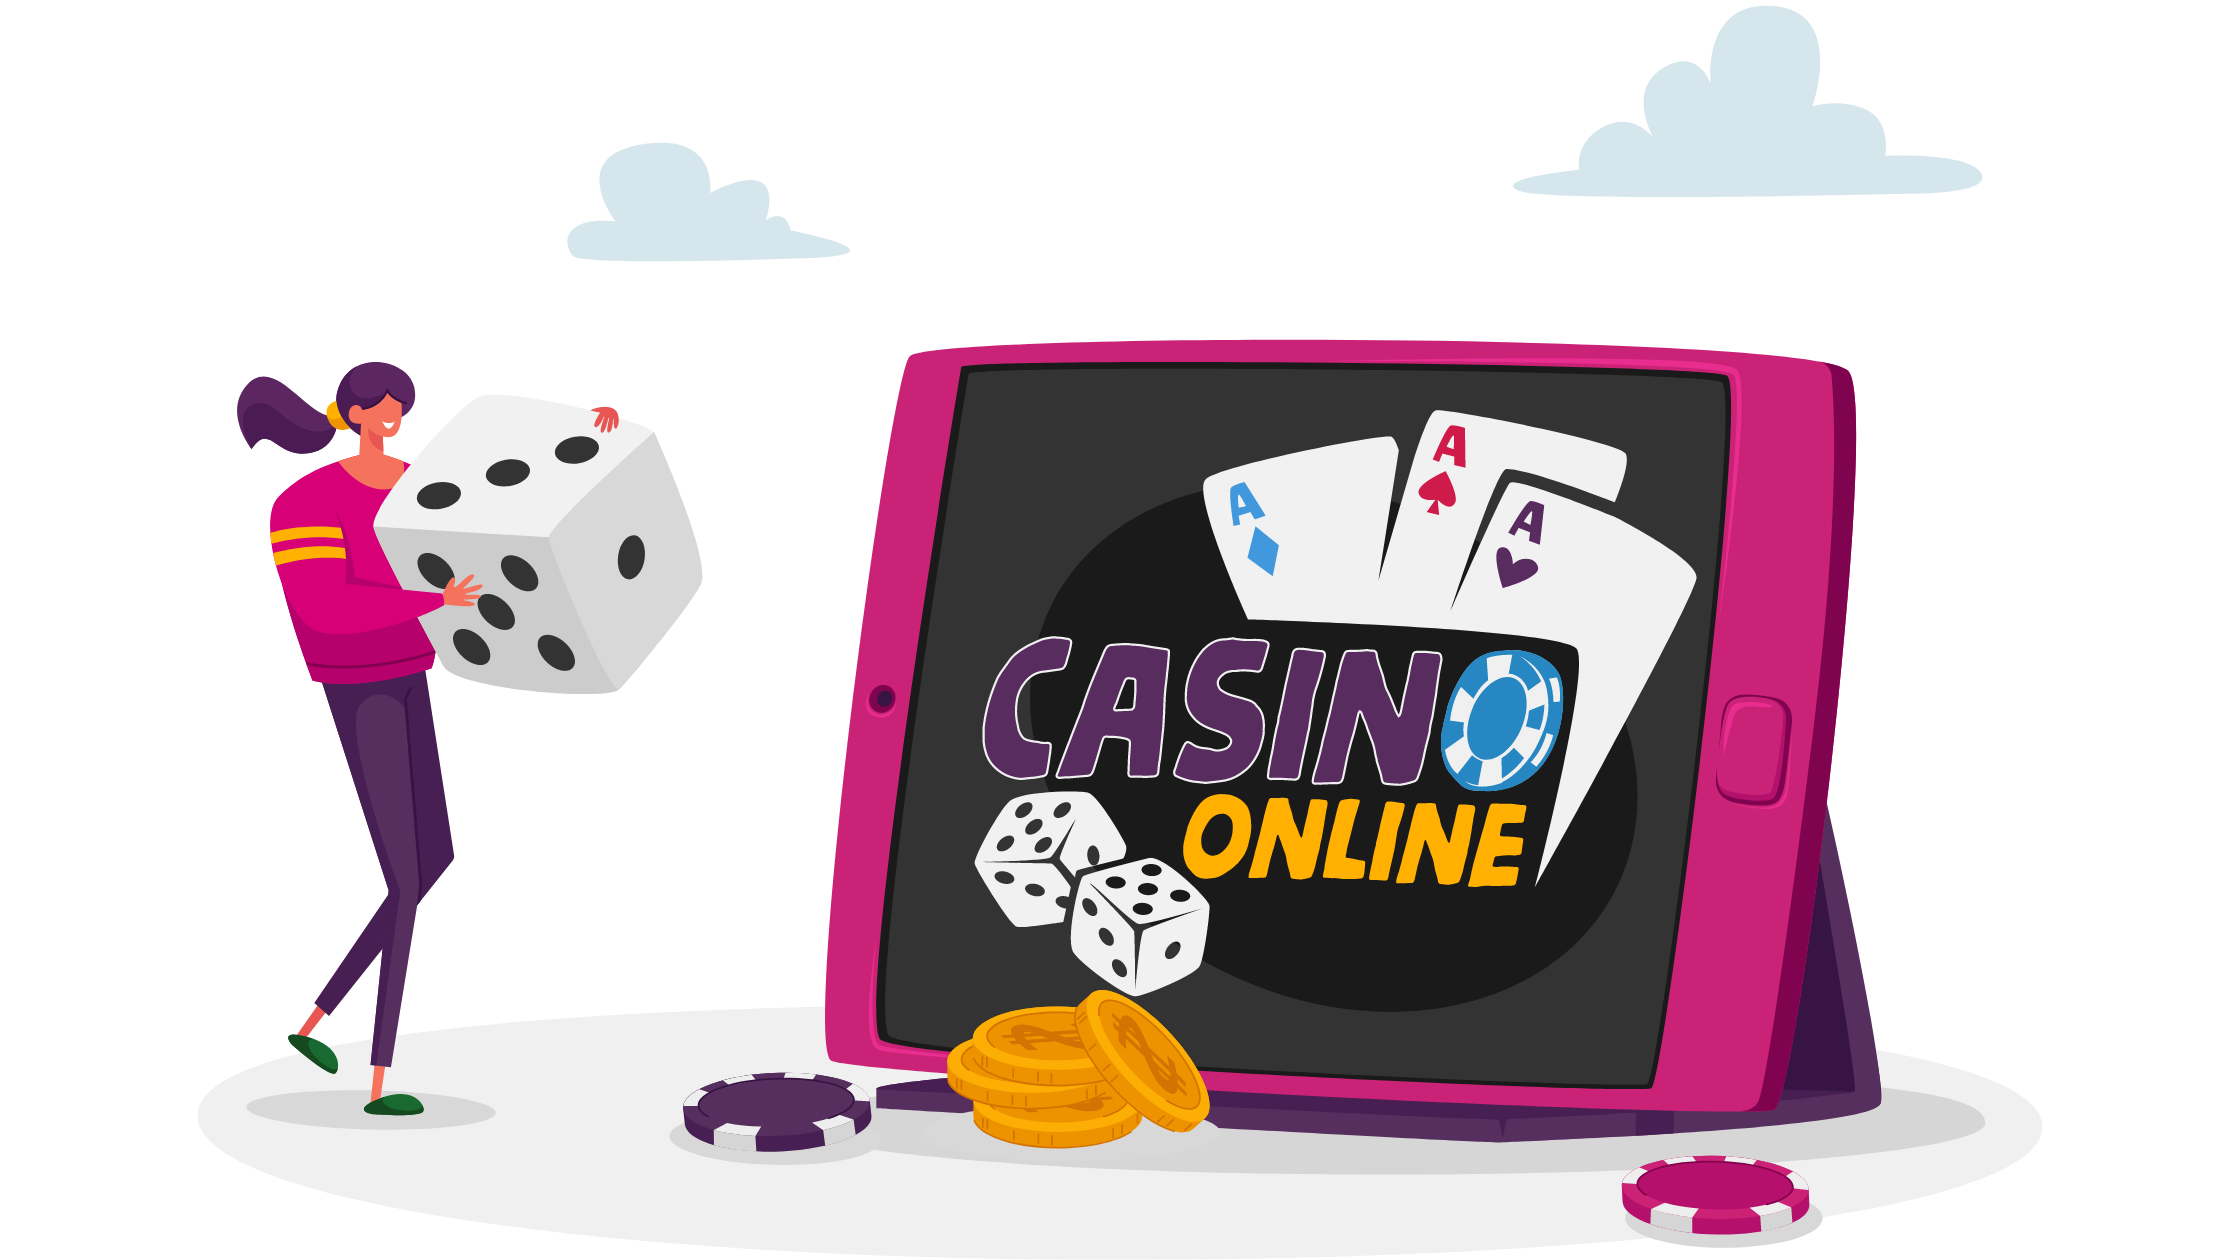 Why is online casino so popular? Fun88 is here to tell you why